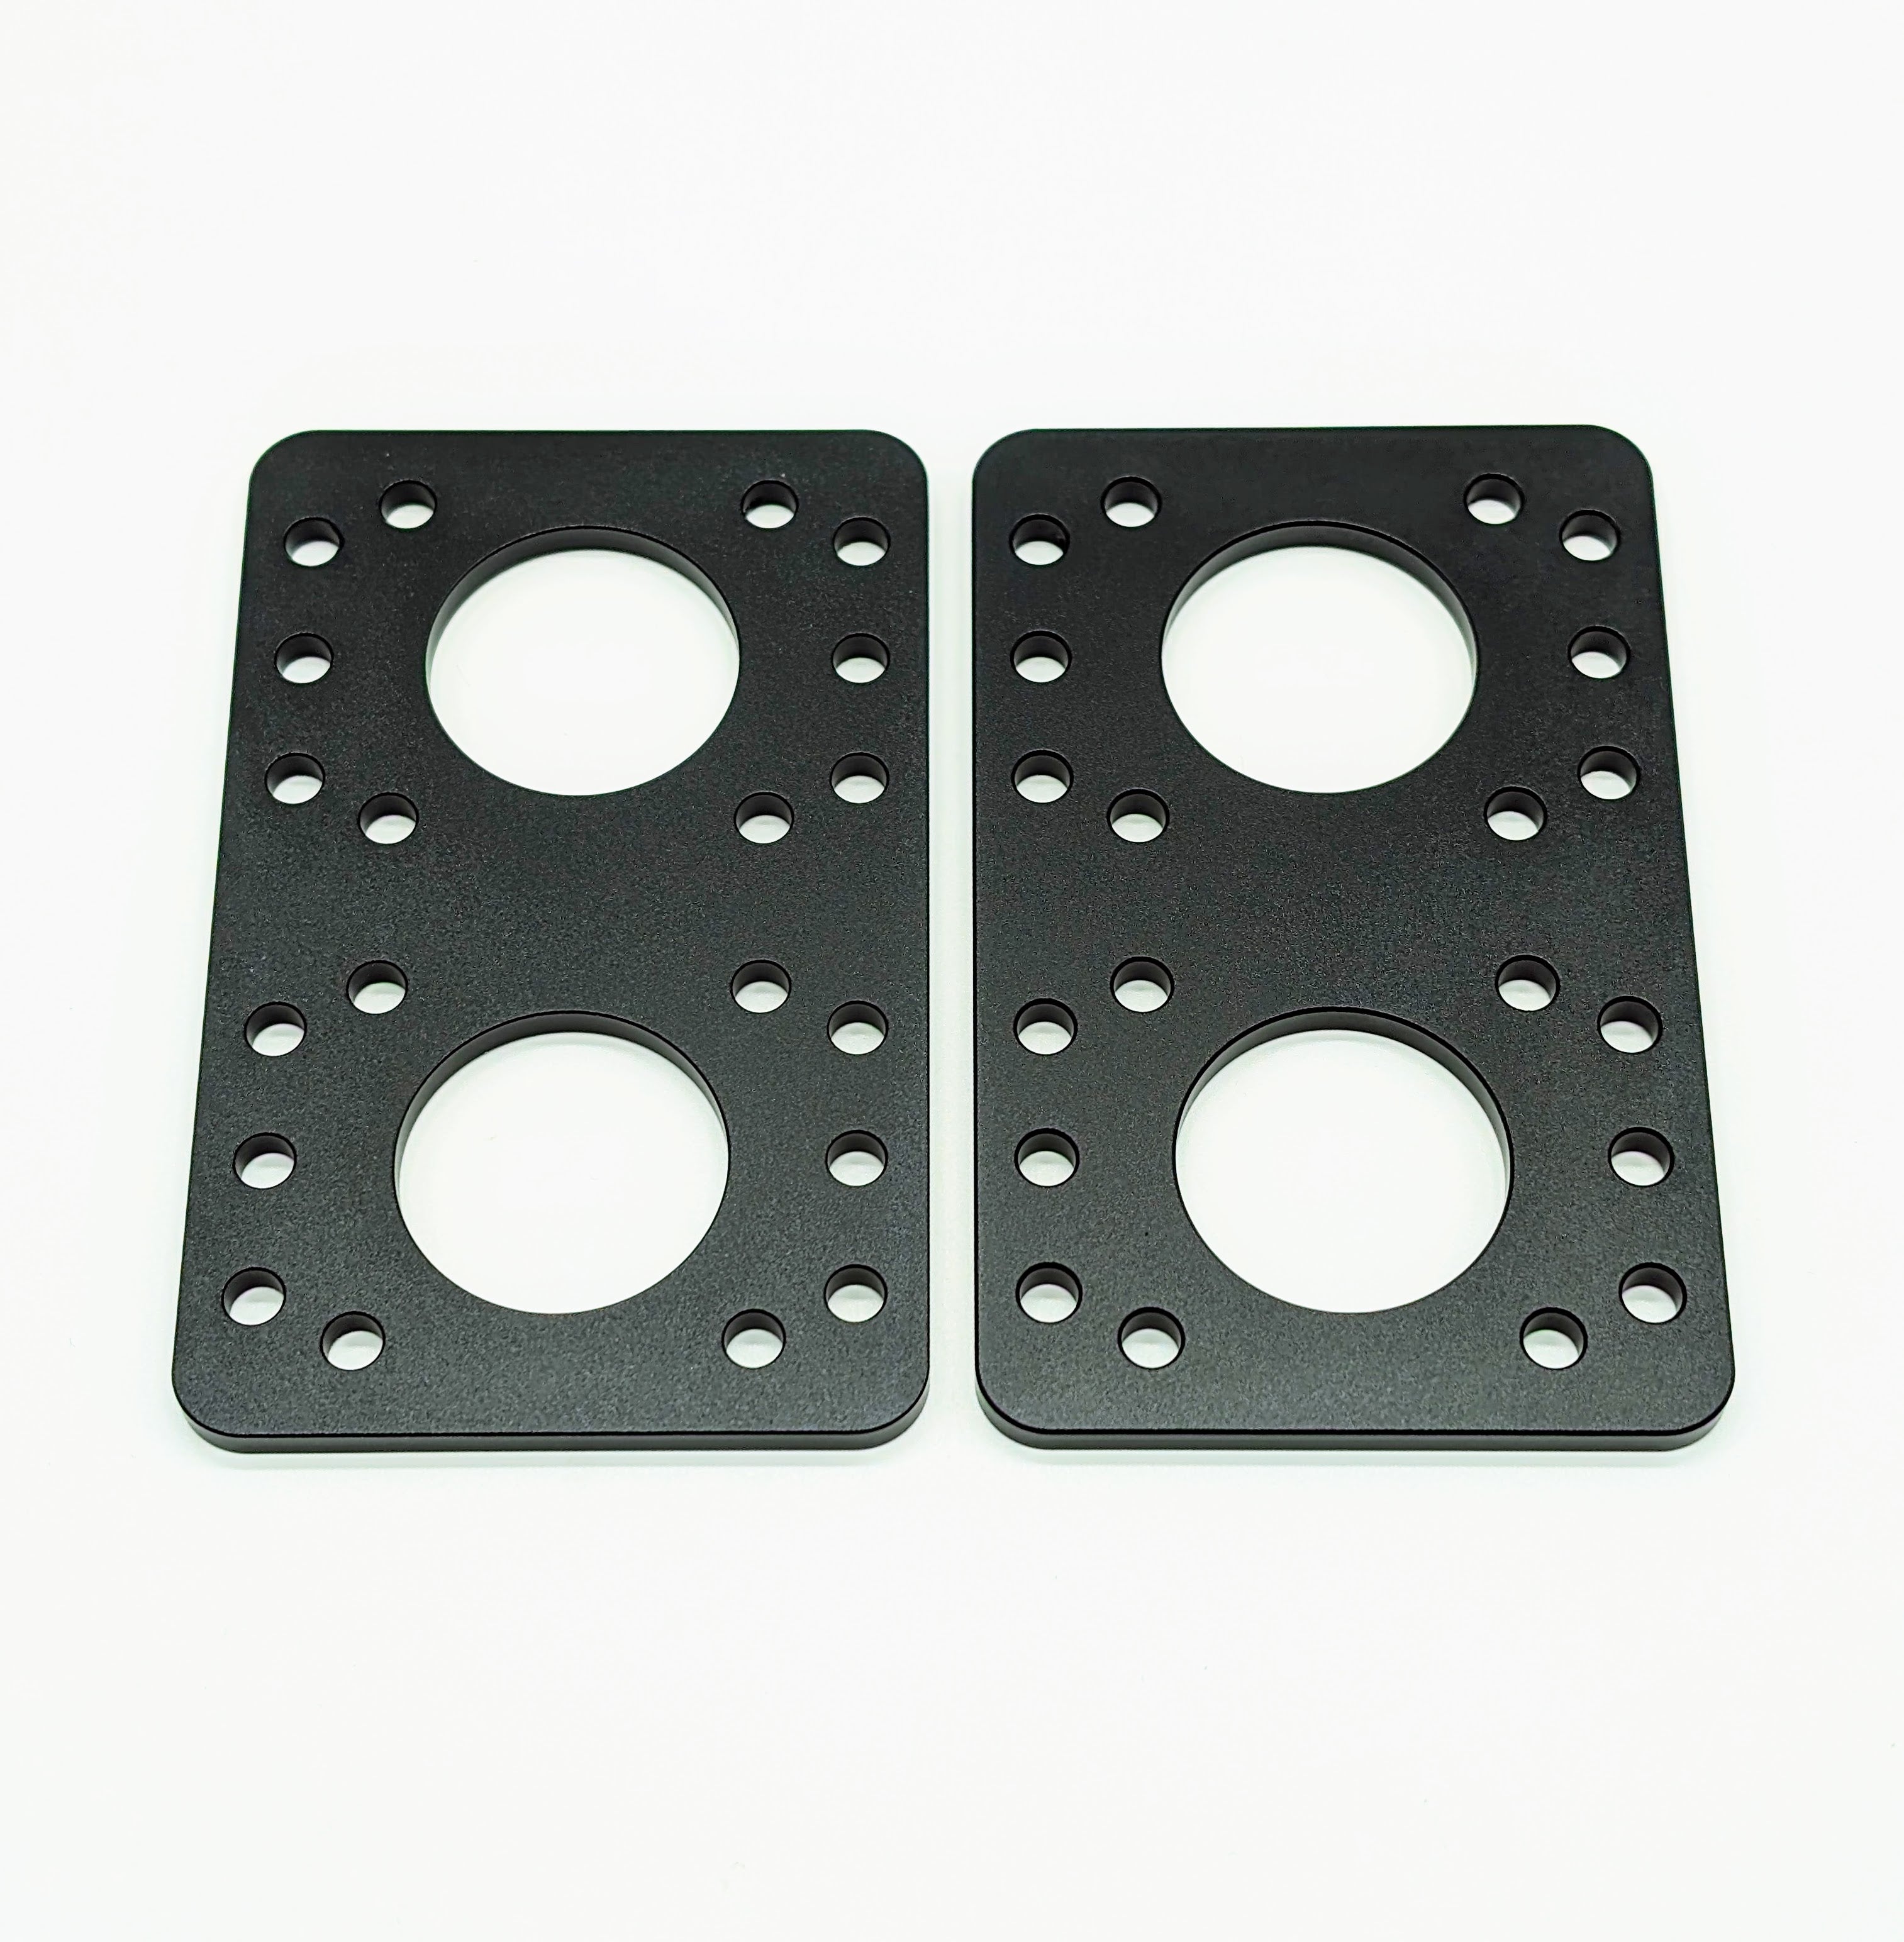 QTY 2 - 2 Inch Vertical Mount Plate